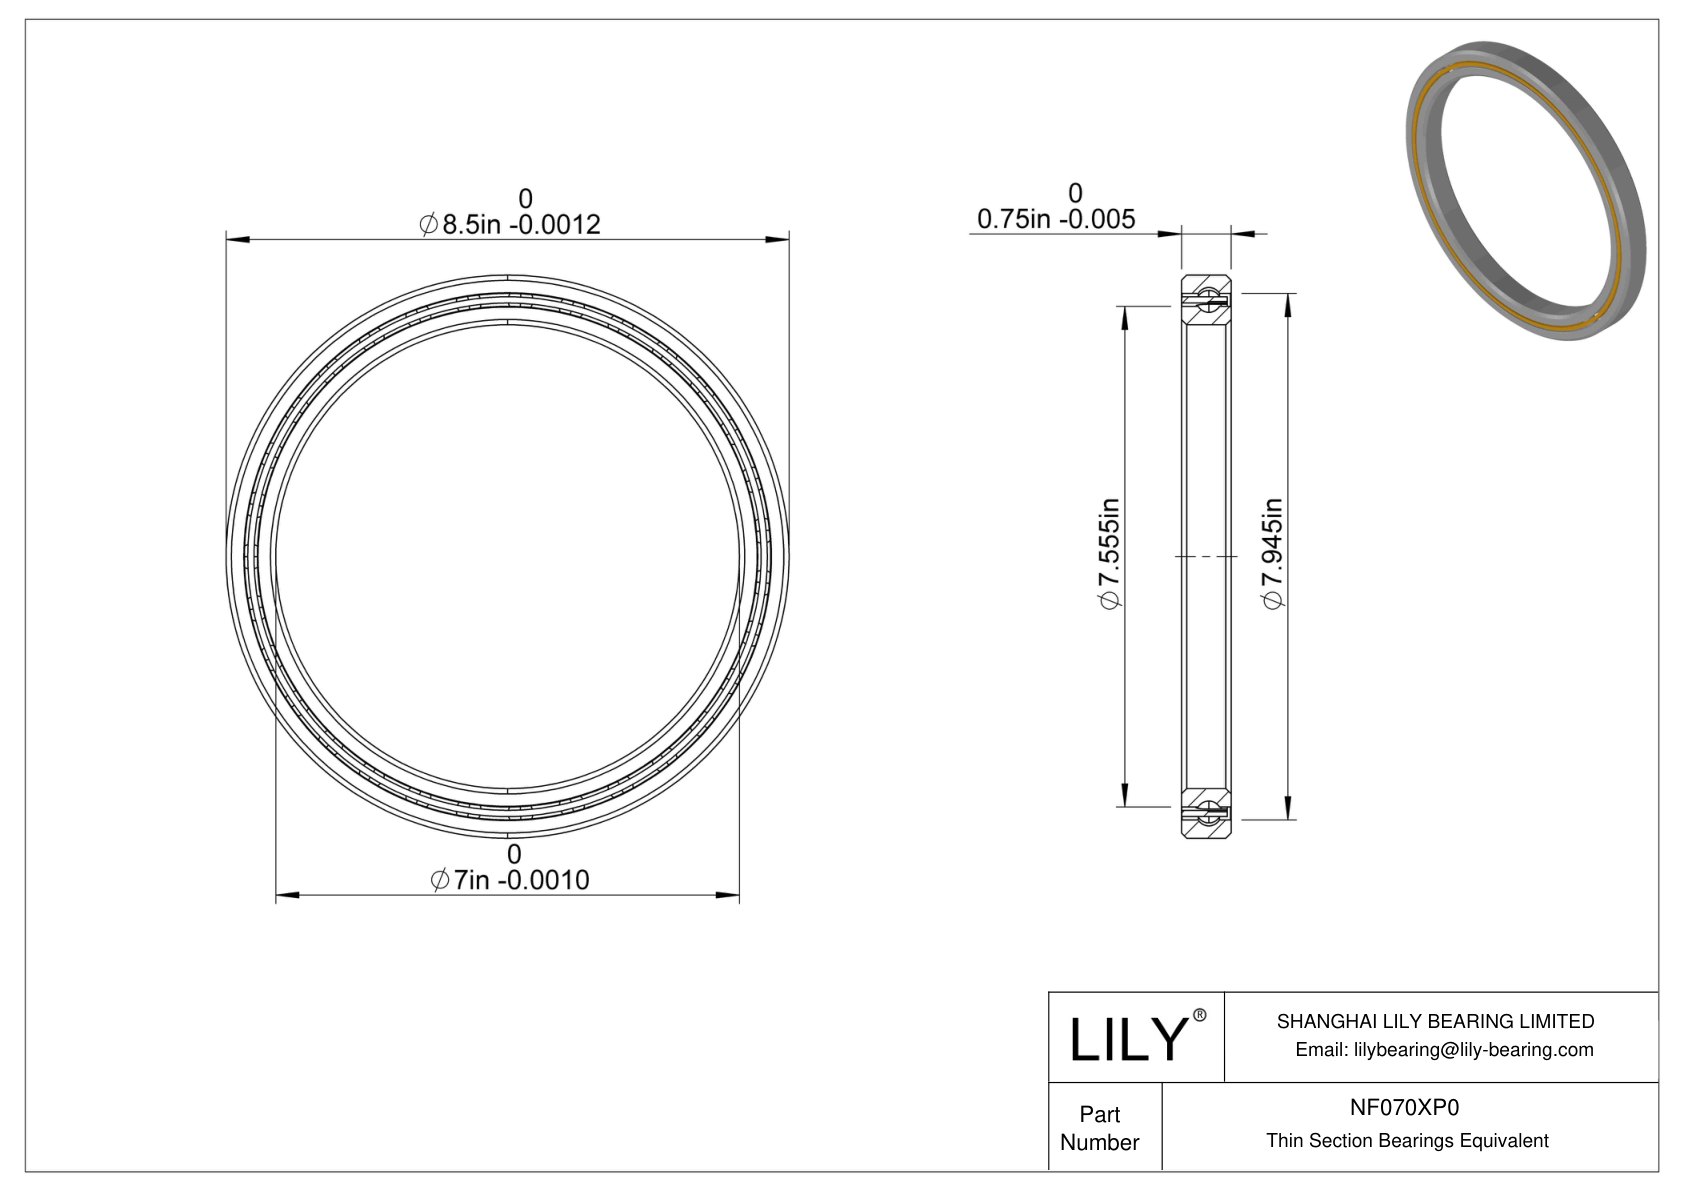 NF070XP0 Constant Section (CS) Bearings cad drawing